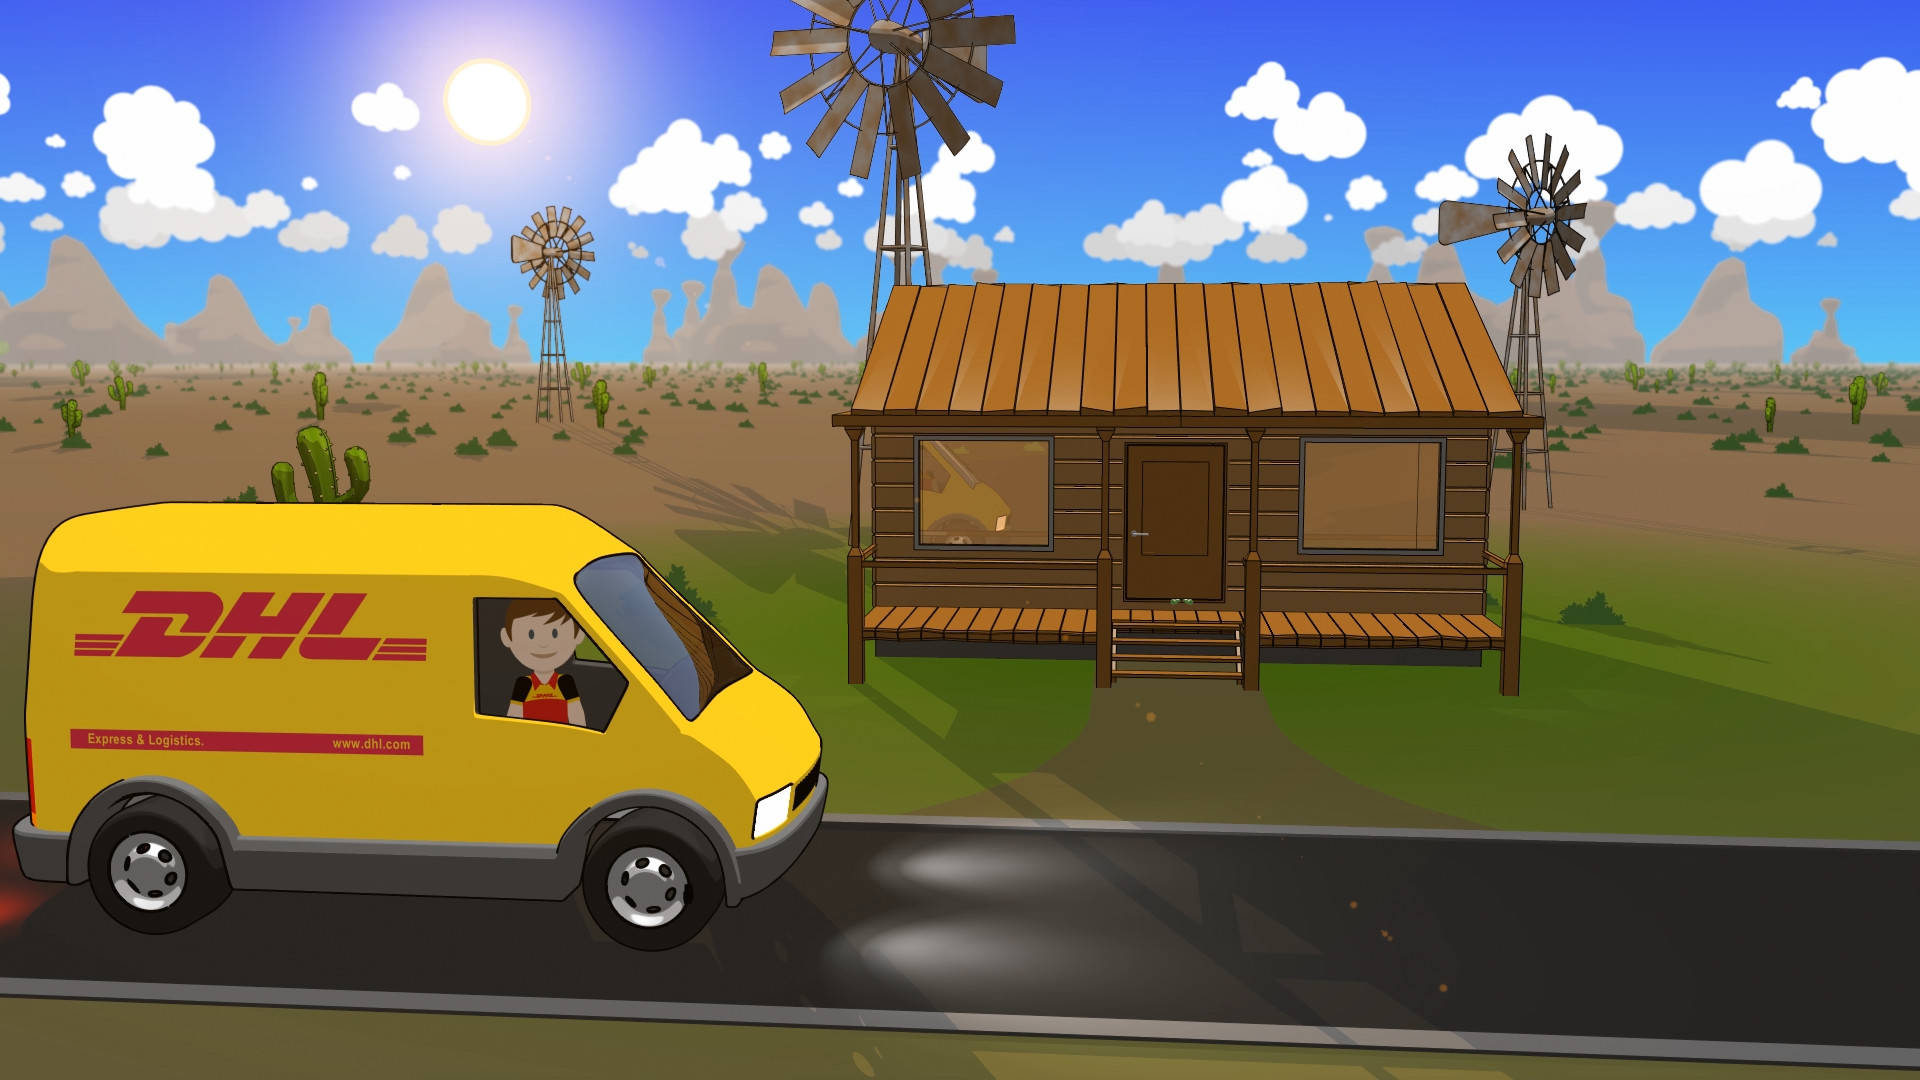 Animated Dhl Commercial Vehicle Background